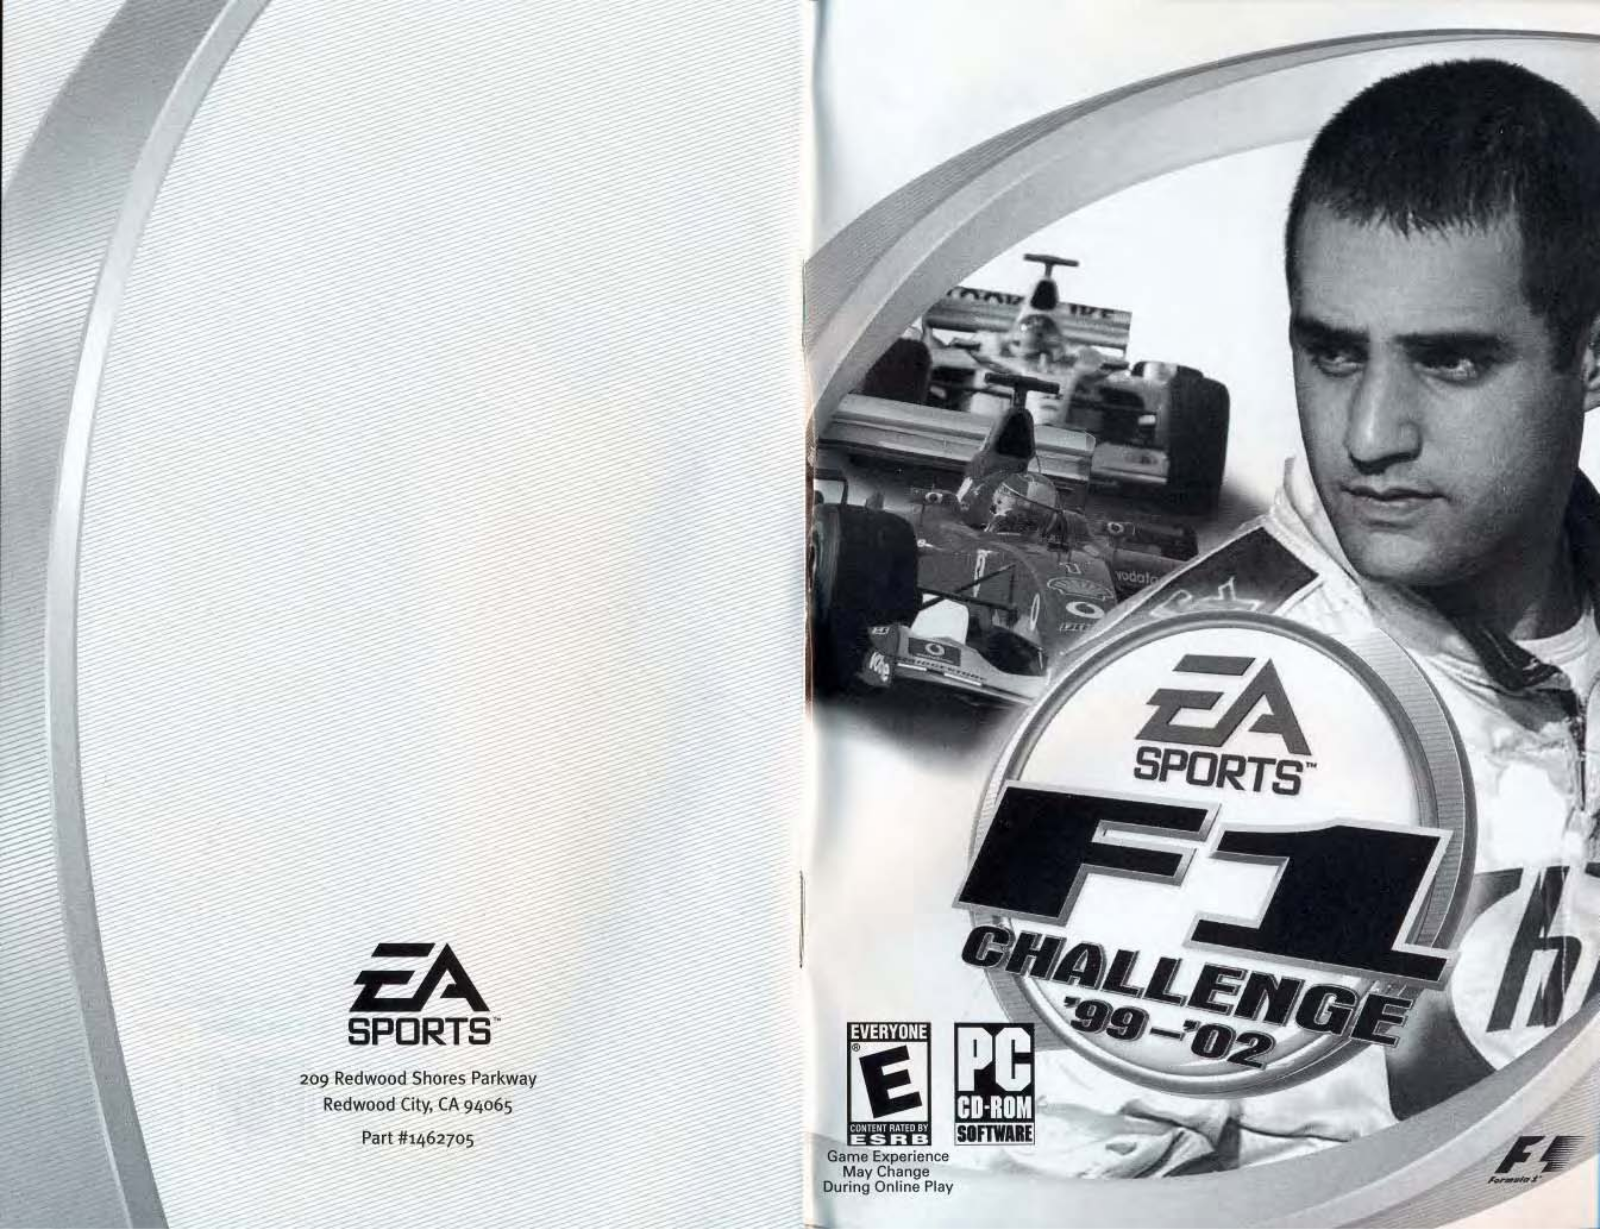 Games PC F1 CHALLENGE 99-02 User Manual